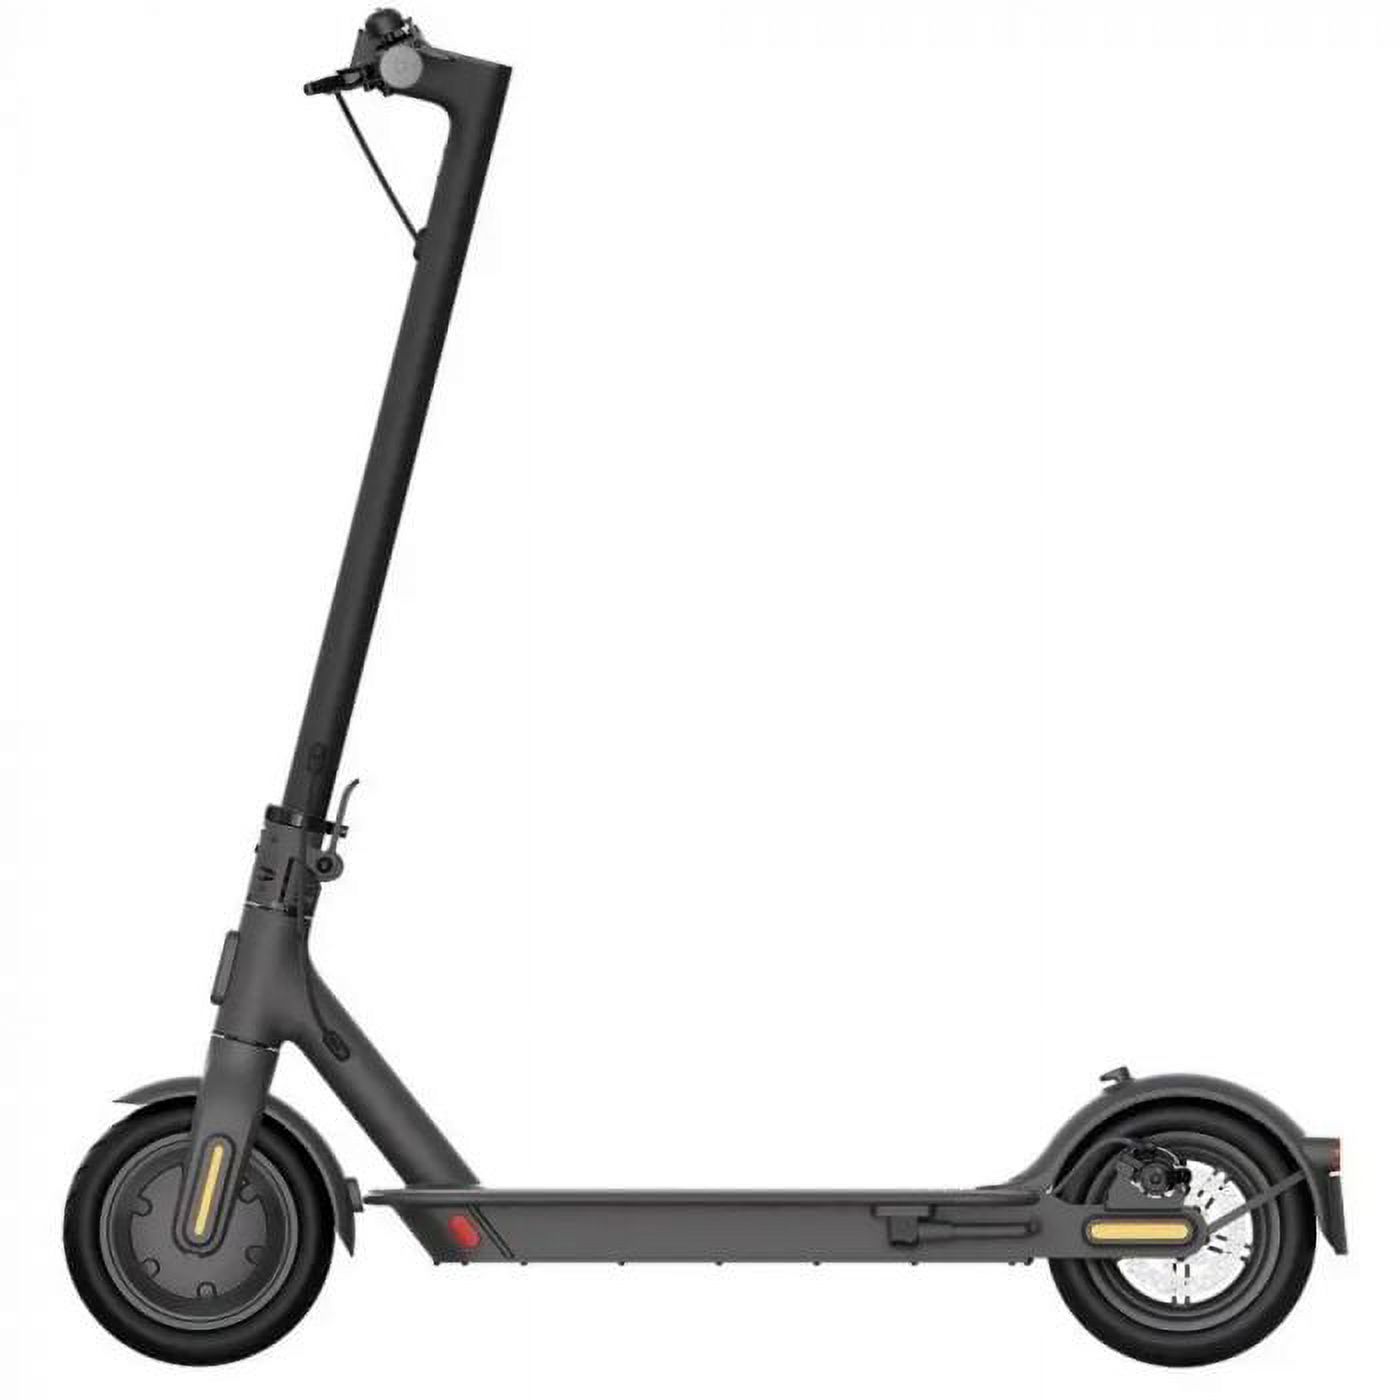 Xiaomi Mi Electric Scooter 1S Latest Model - image 2 of 6